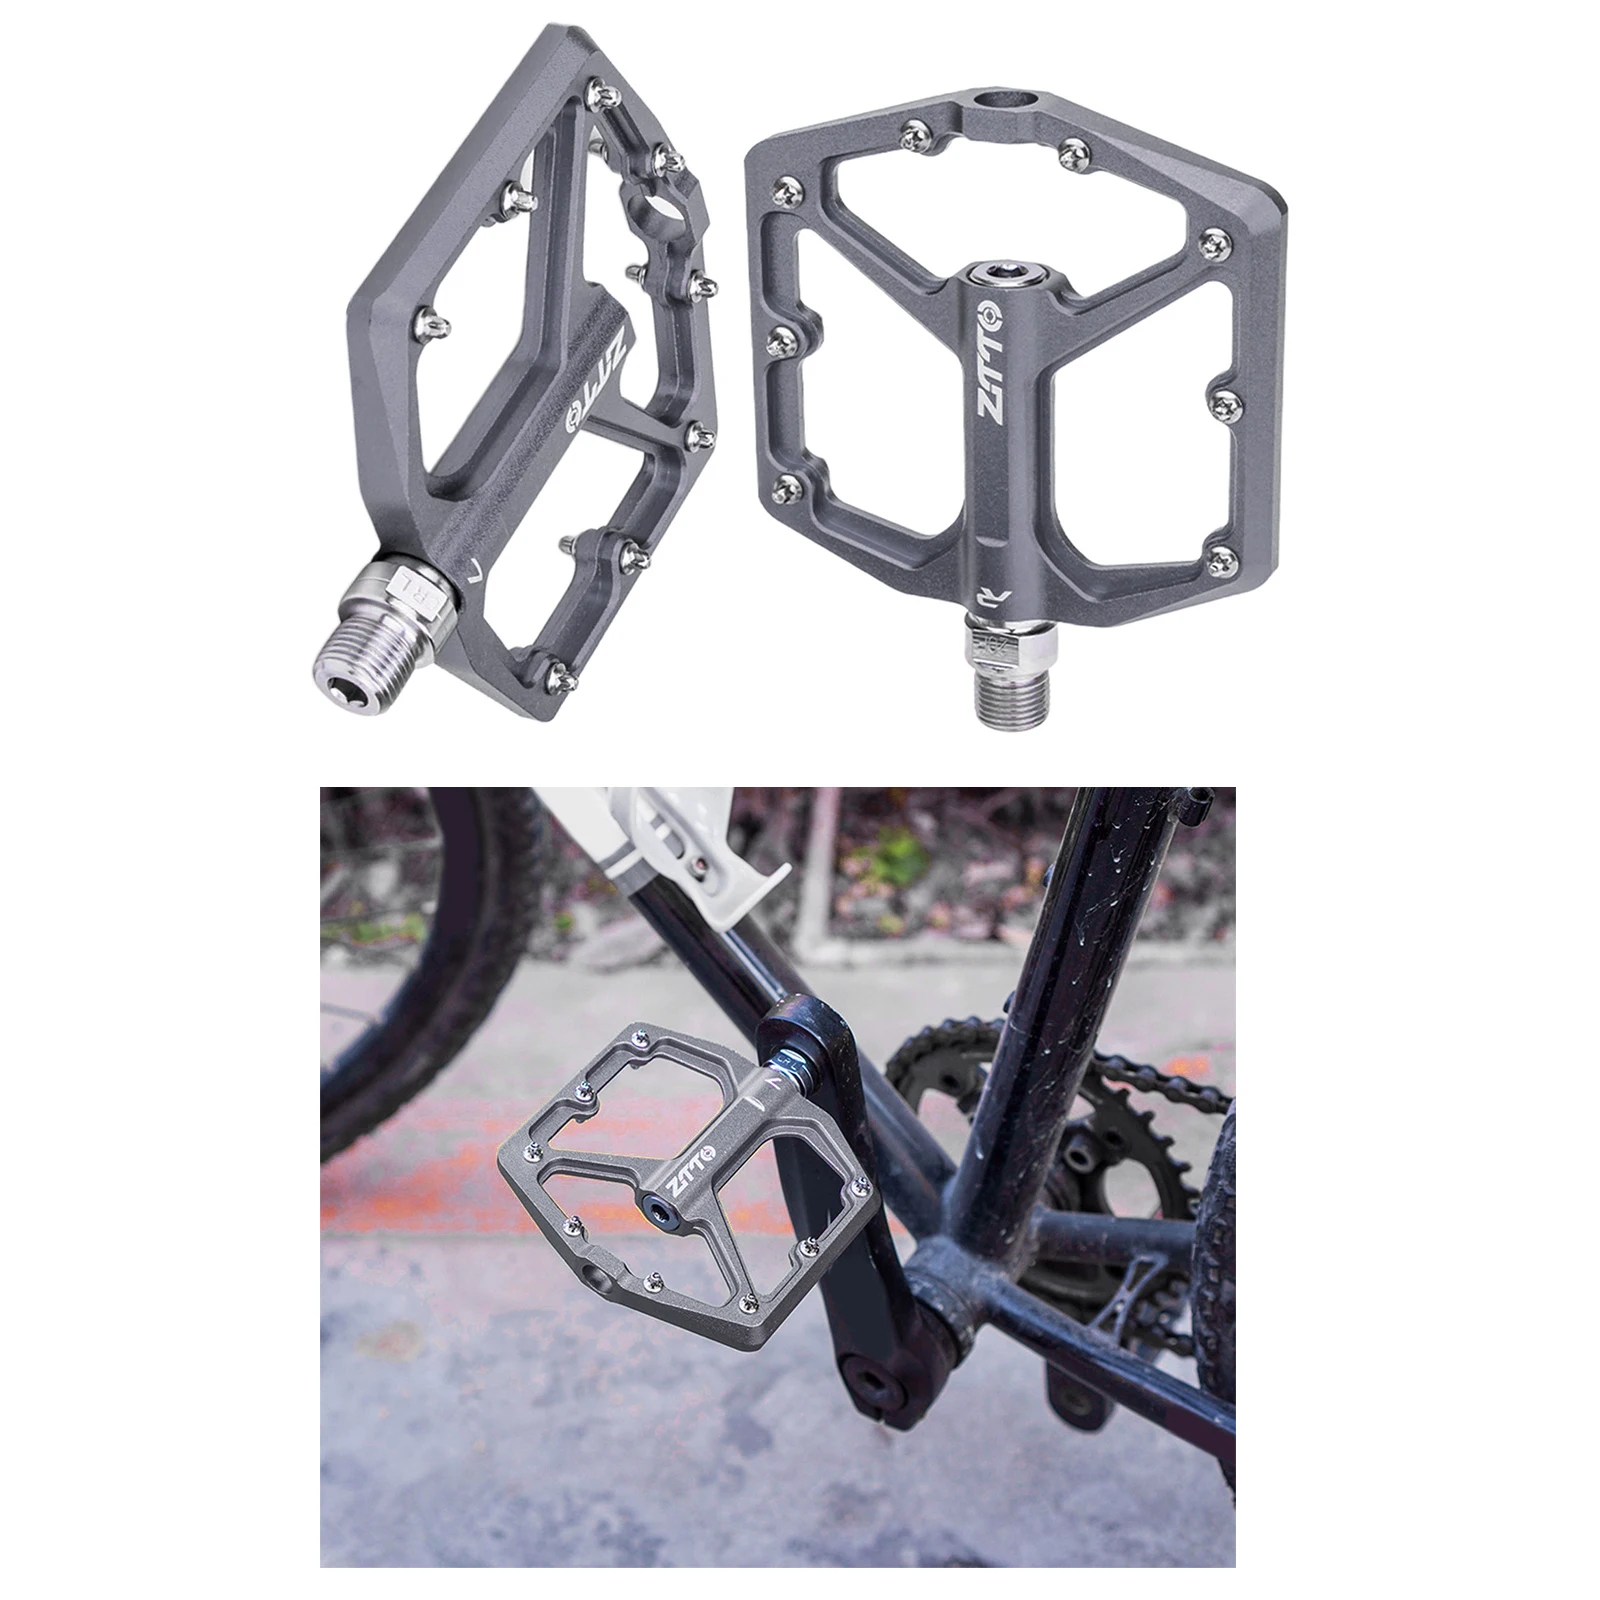 CNC Aluminum Alloy Sealed Bearing Anti-slip Bicycle Pedals flat Platform Pedals Ultralight Mountain Bike MTB Bicycle Parts